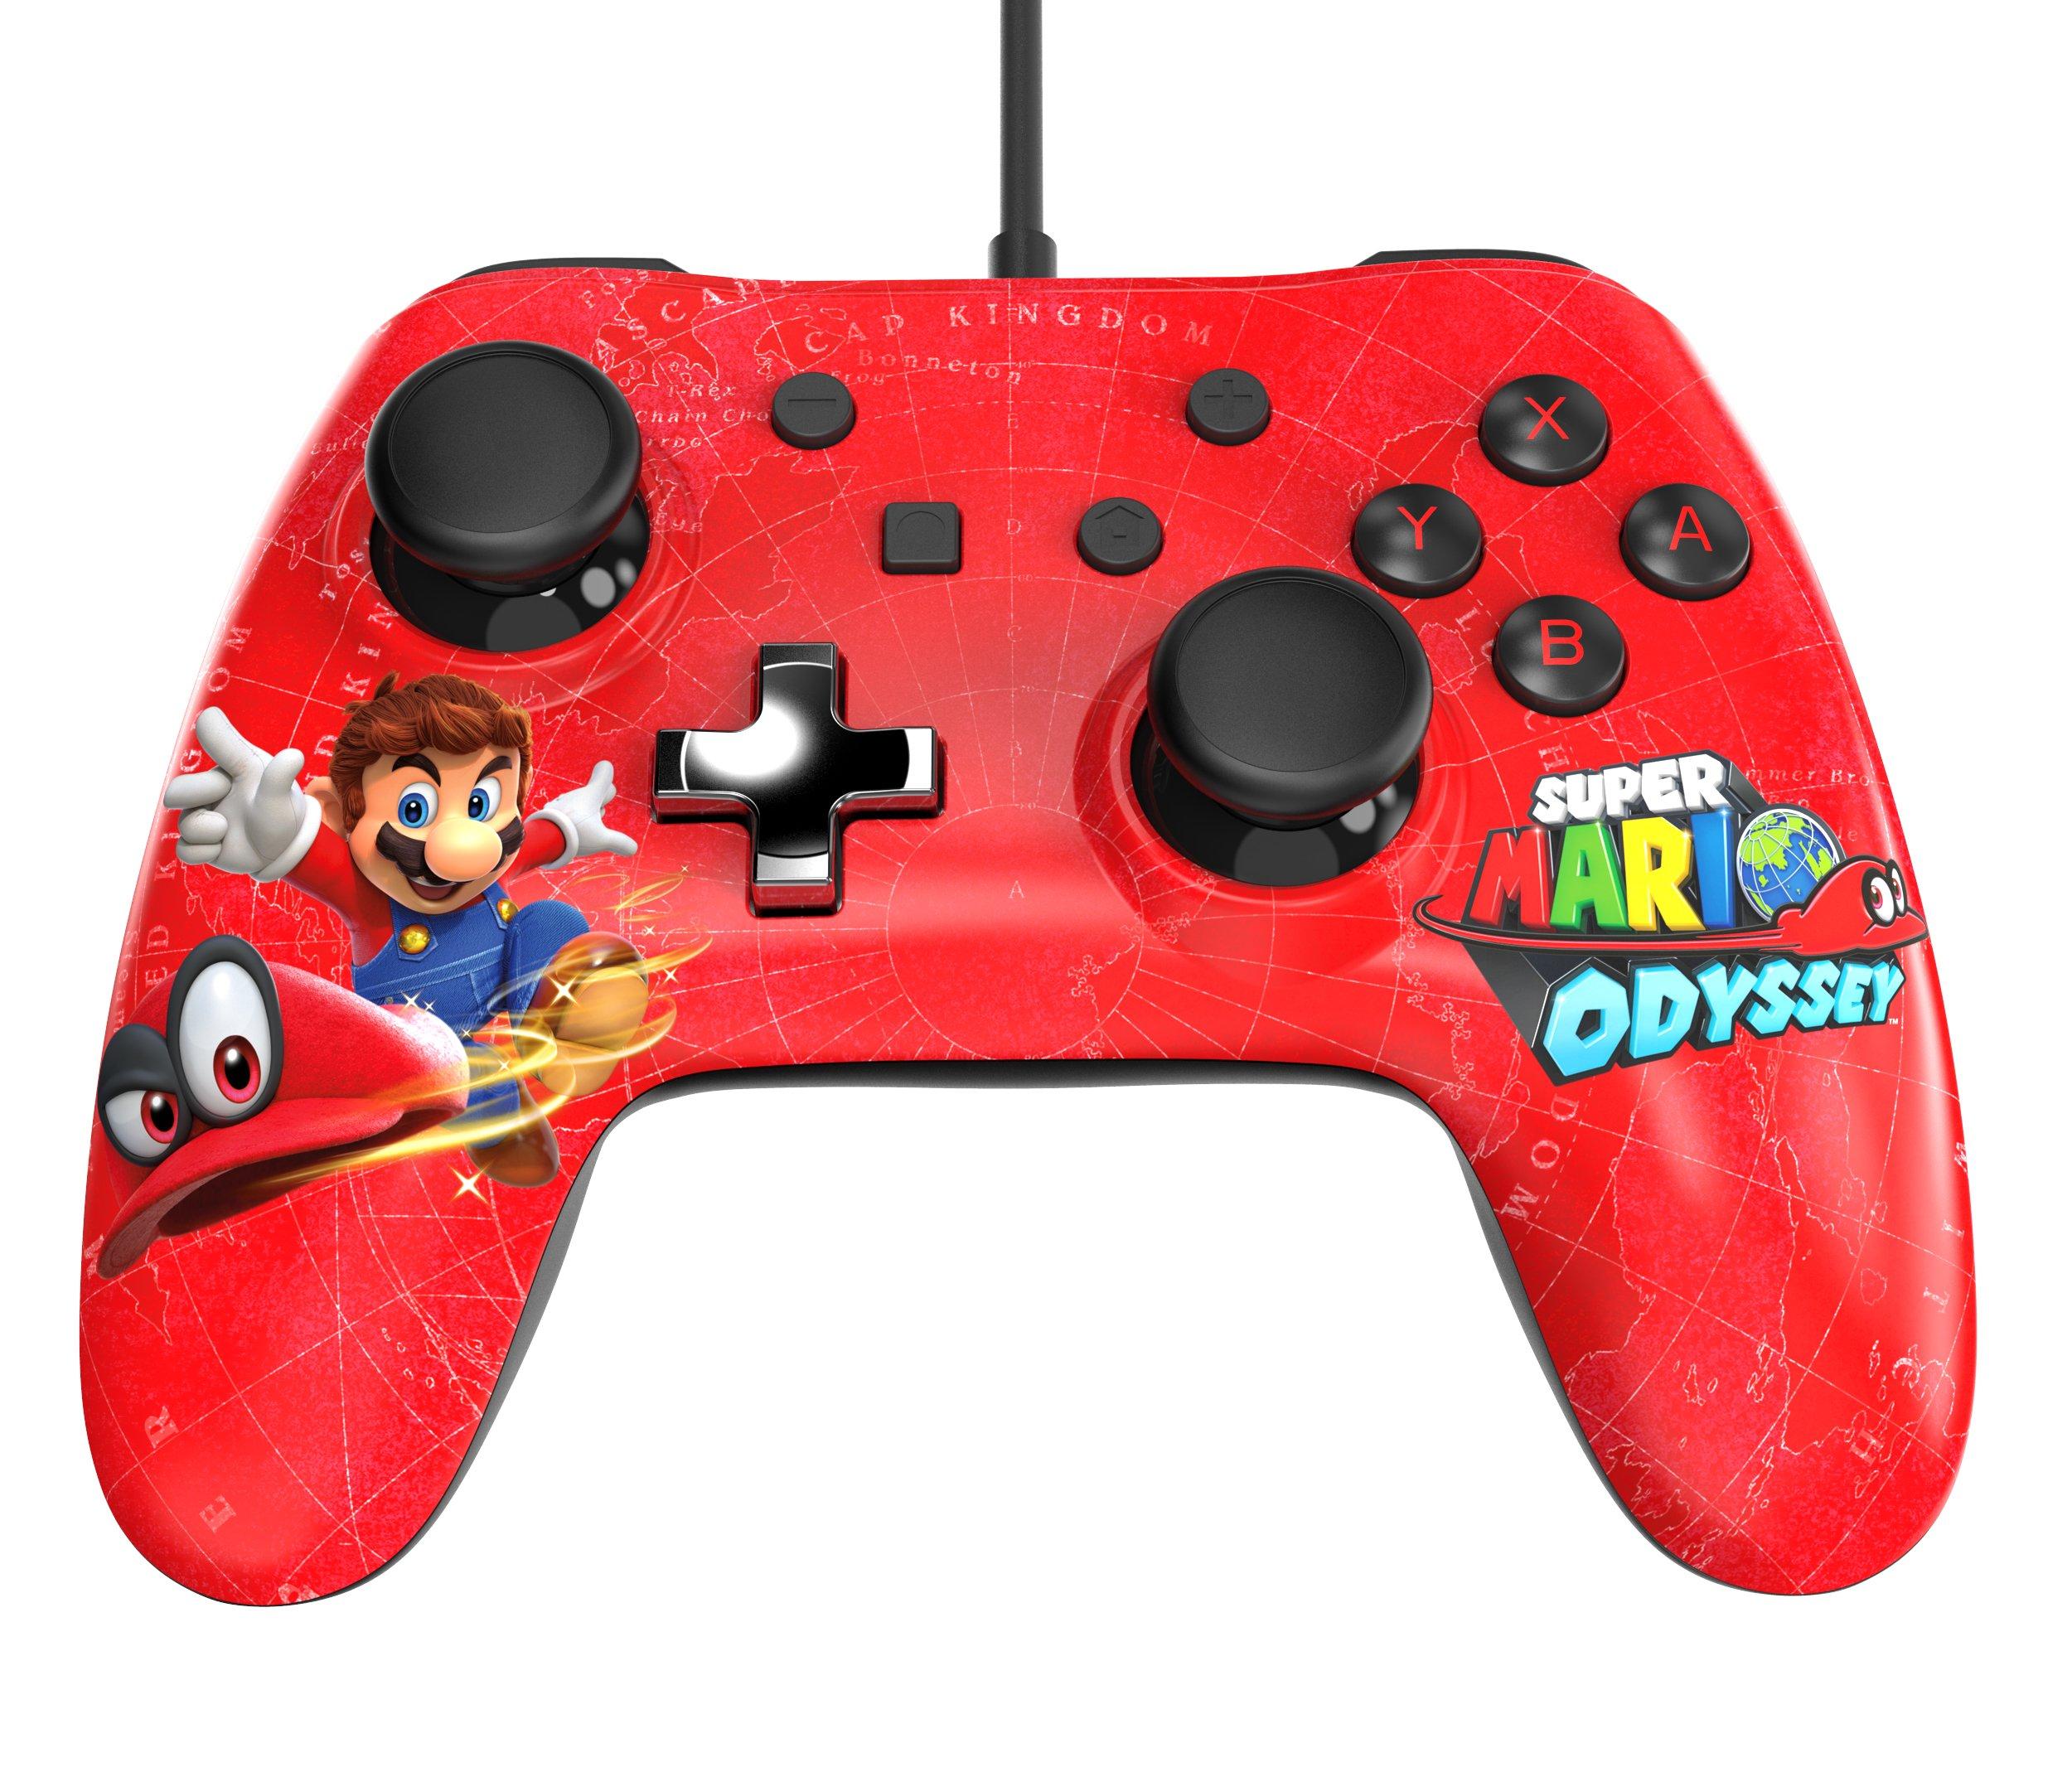 nintendo switch with mario odyssey & pro controller